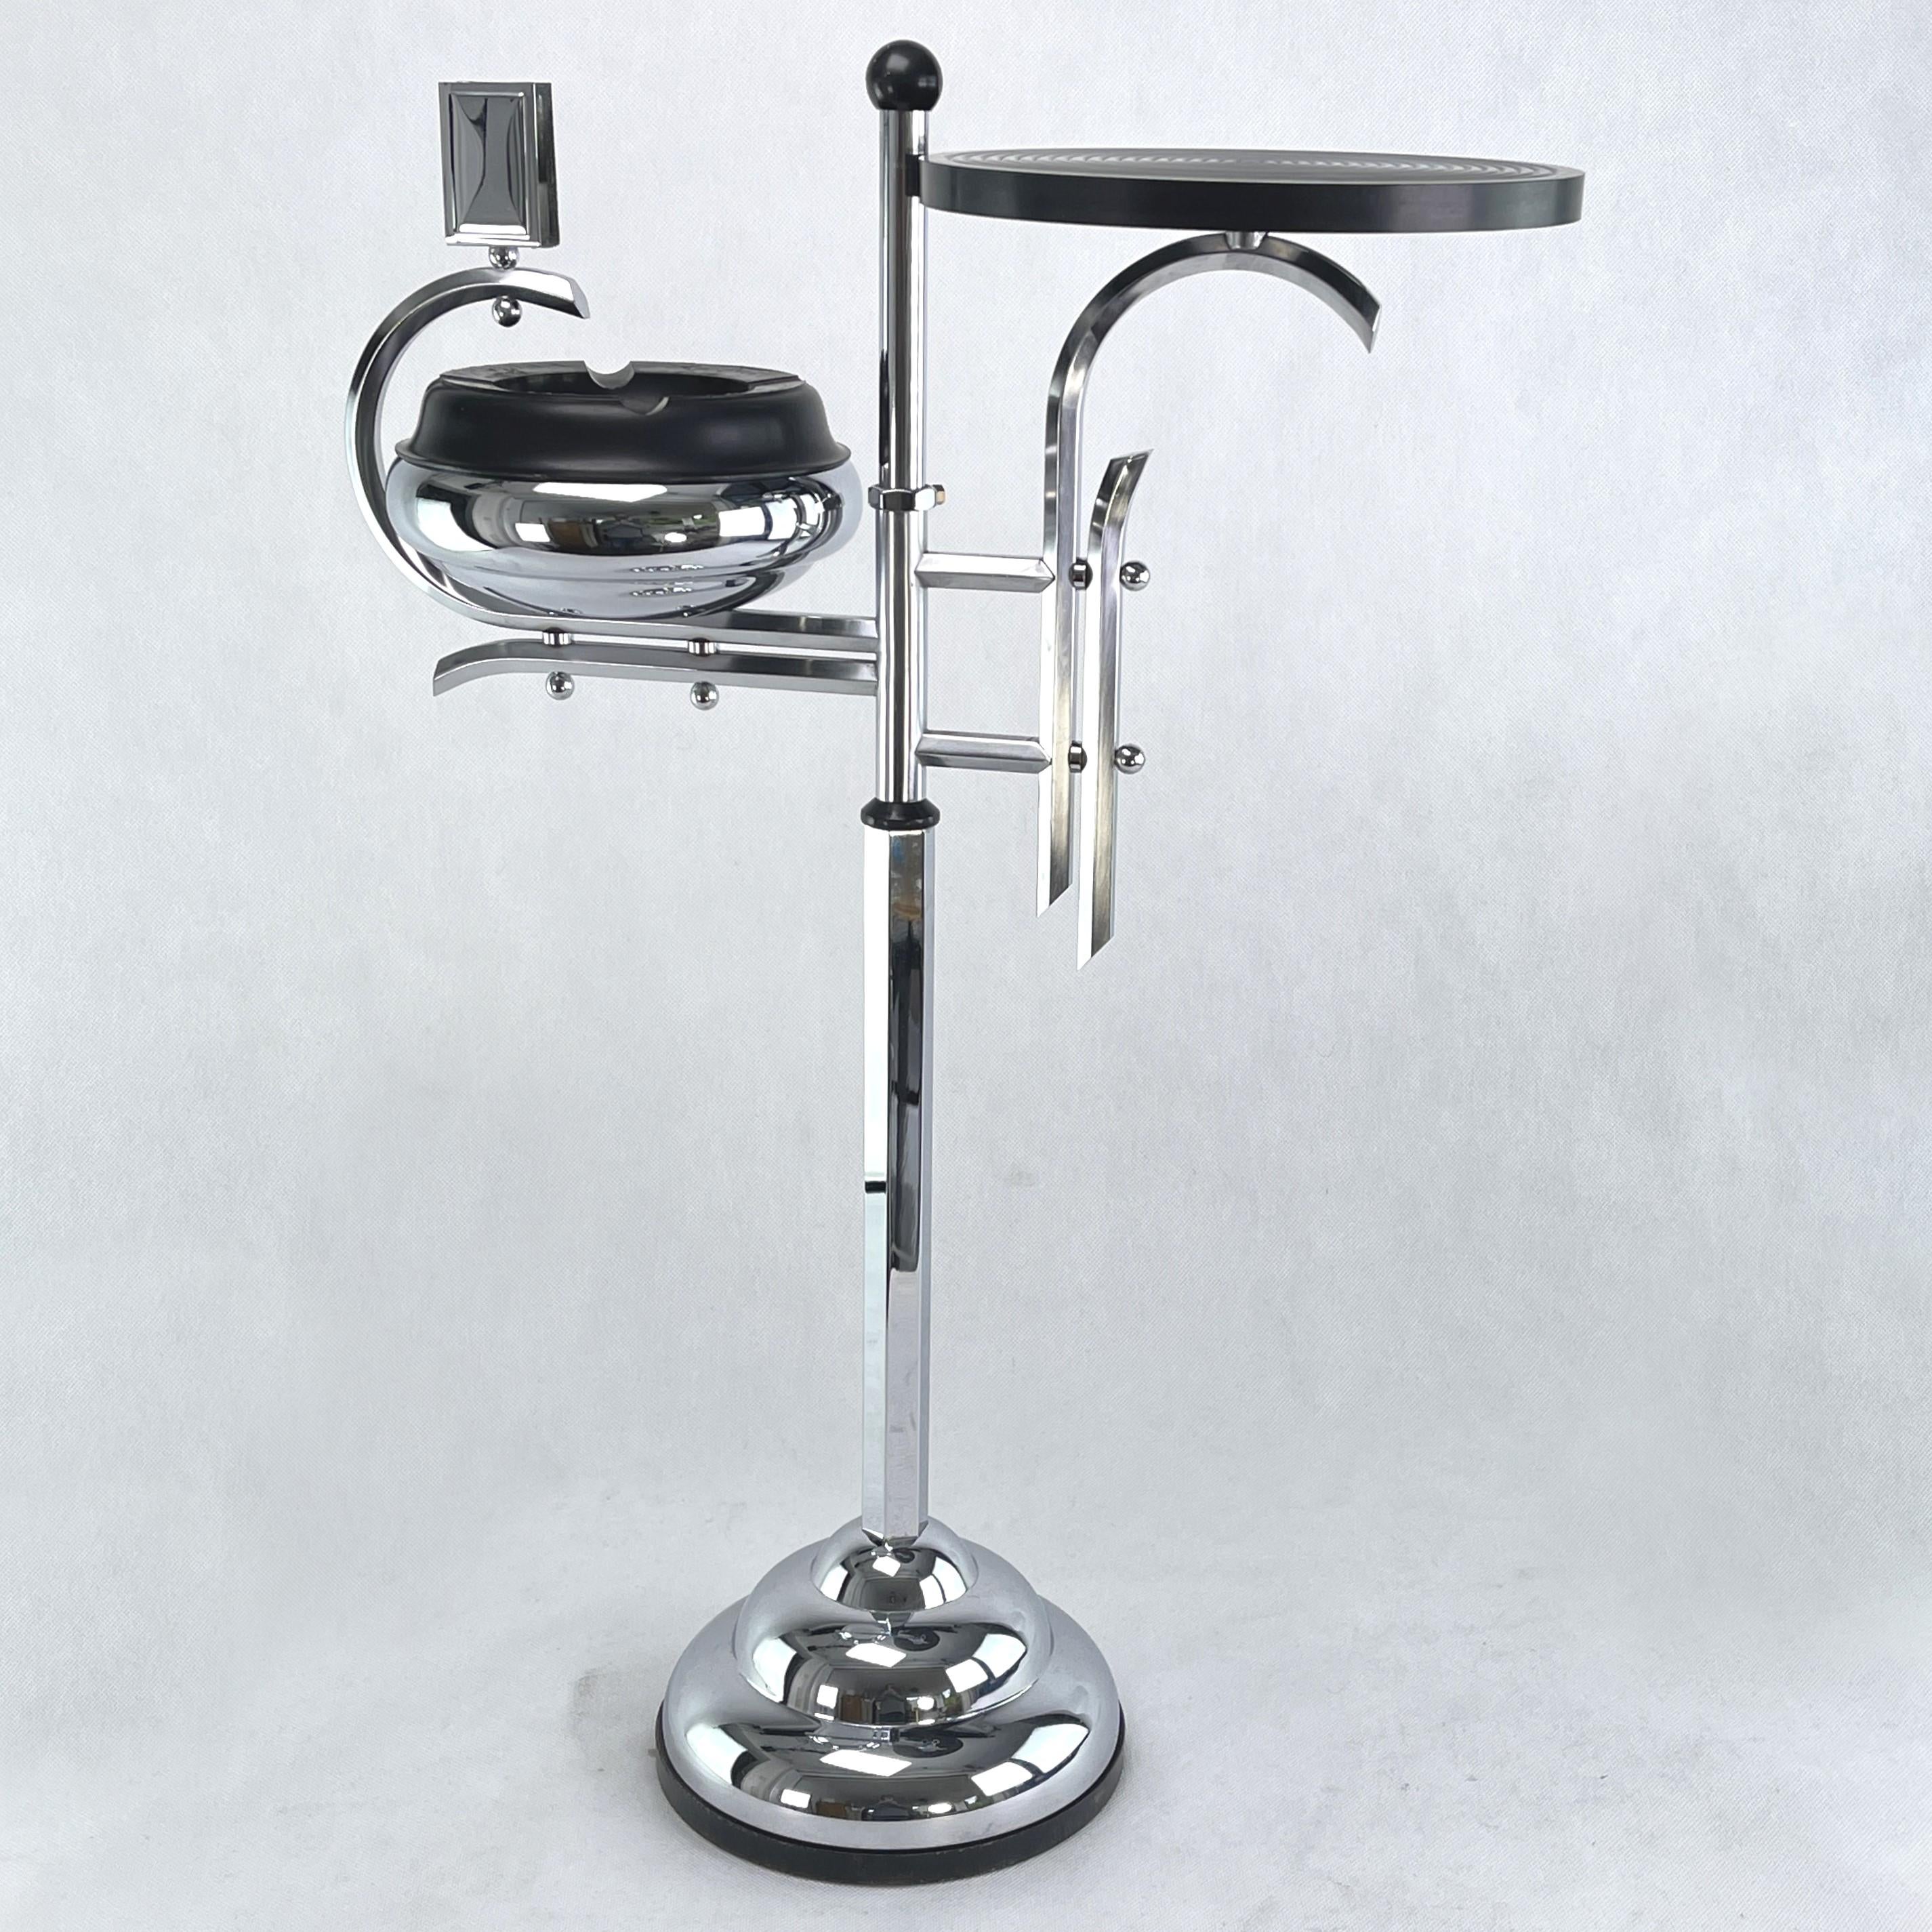 Art Deco Ashtray Stand, Chrome and Bakelite by Demeyere, Belgium, 1930s For Sale 3